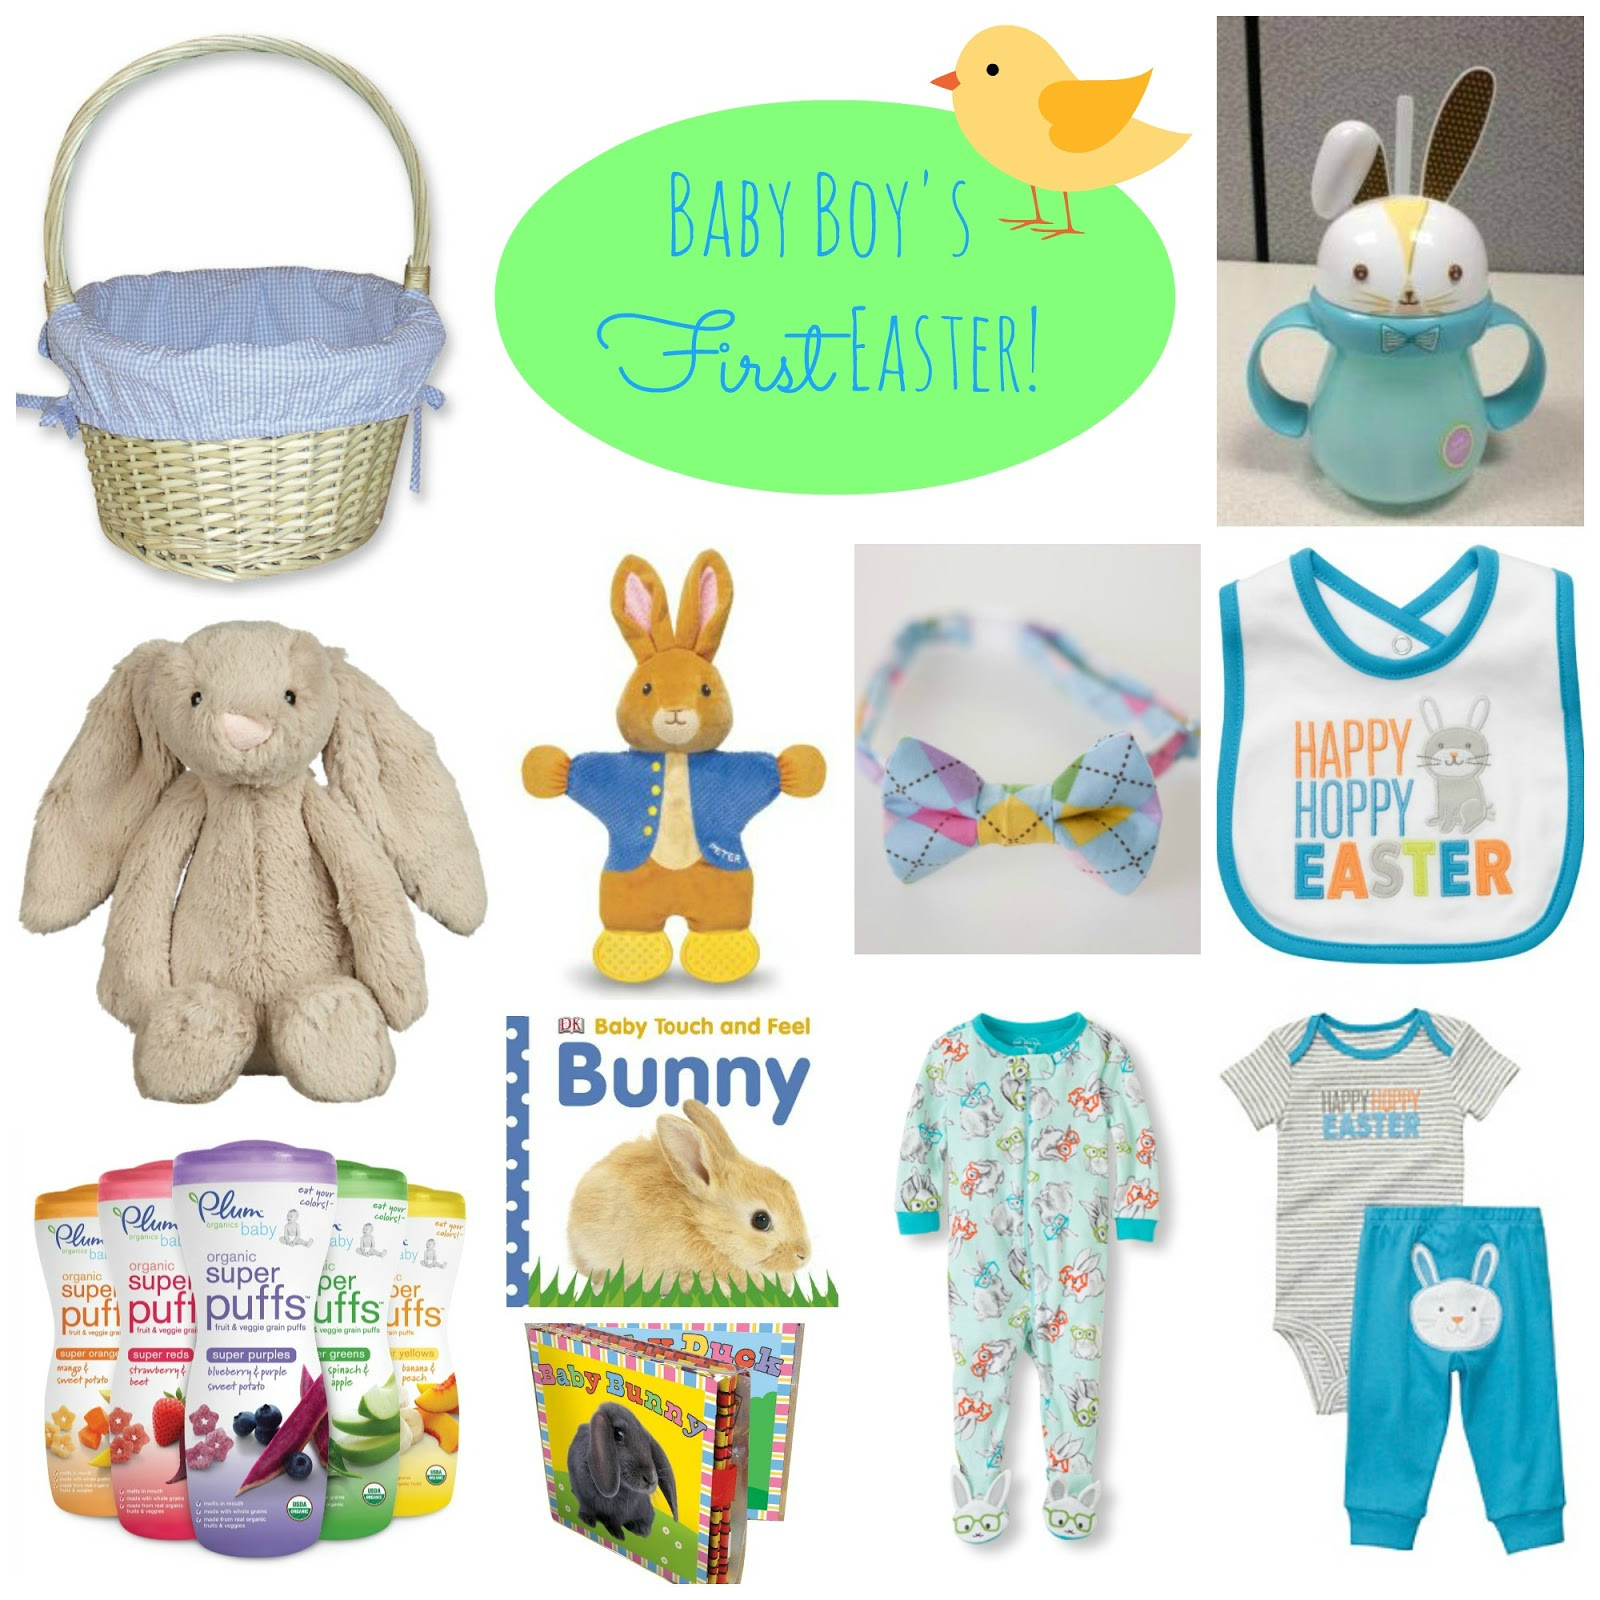 Boys Easter Basket Ideas
 Simple Suburbia Baby s First Easter Basket Ideas